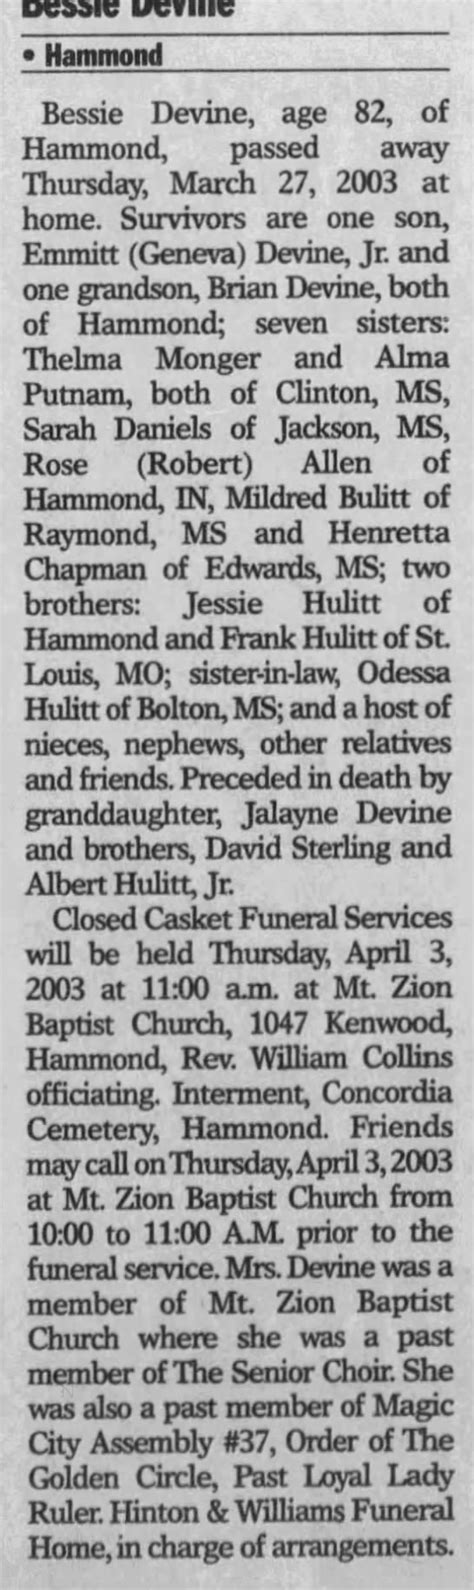 Hammond times obituary. Start home delivery of The Times and enjoy full access to our digital products along with your print subscription. Digital only subscriptions are also available. ... Obituaries. Call: 219-933-3293 ... 